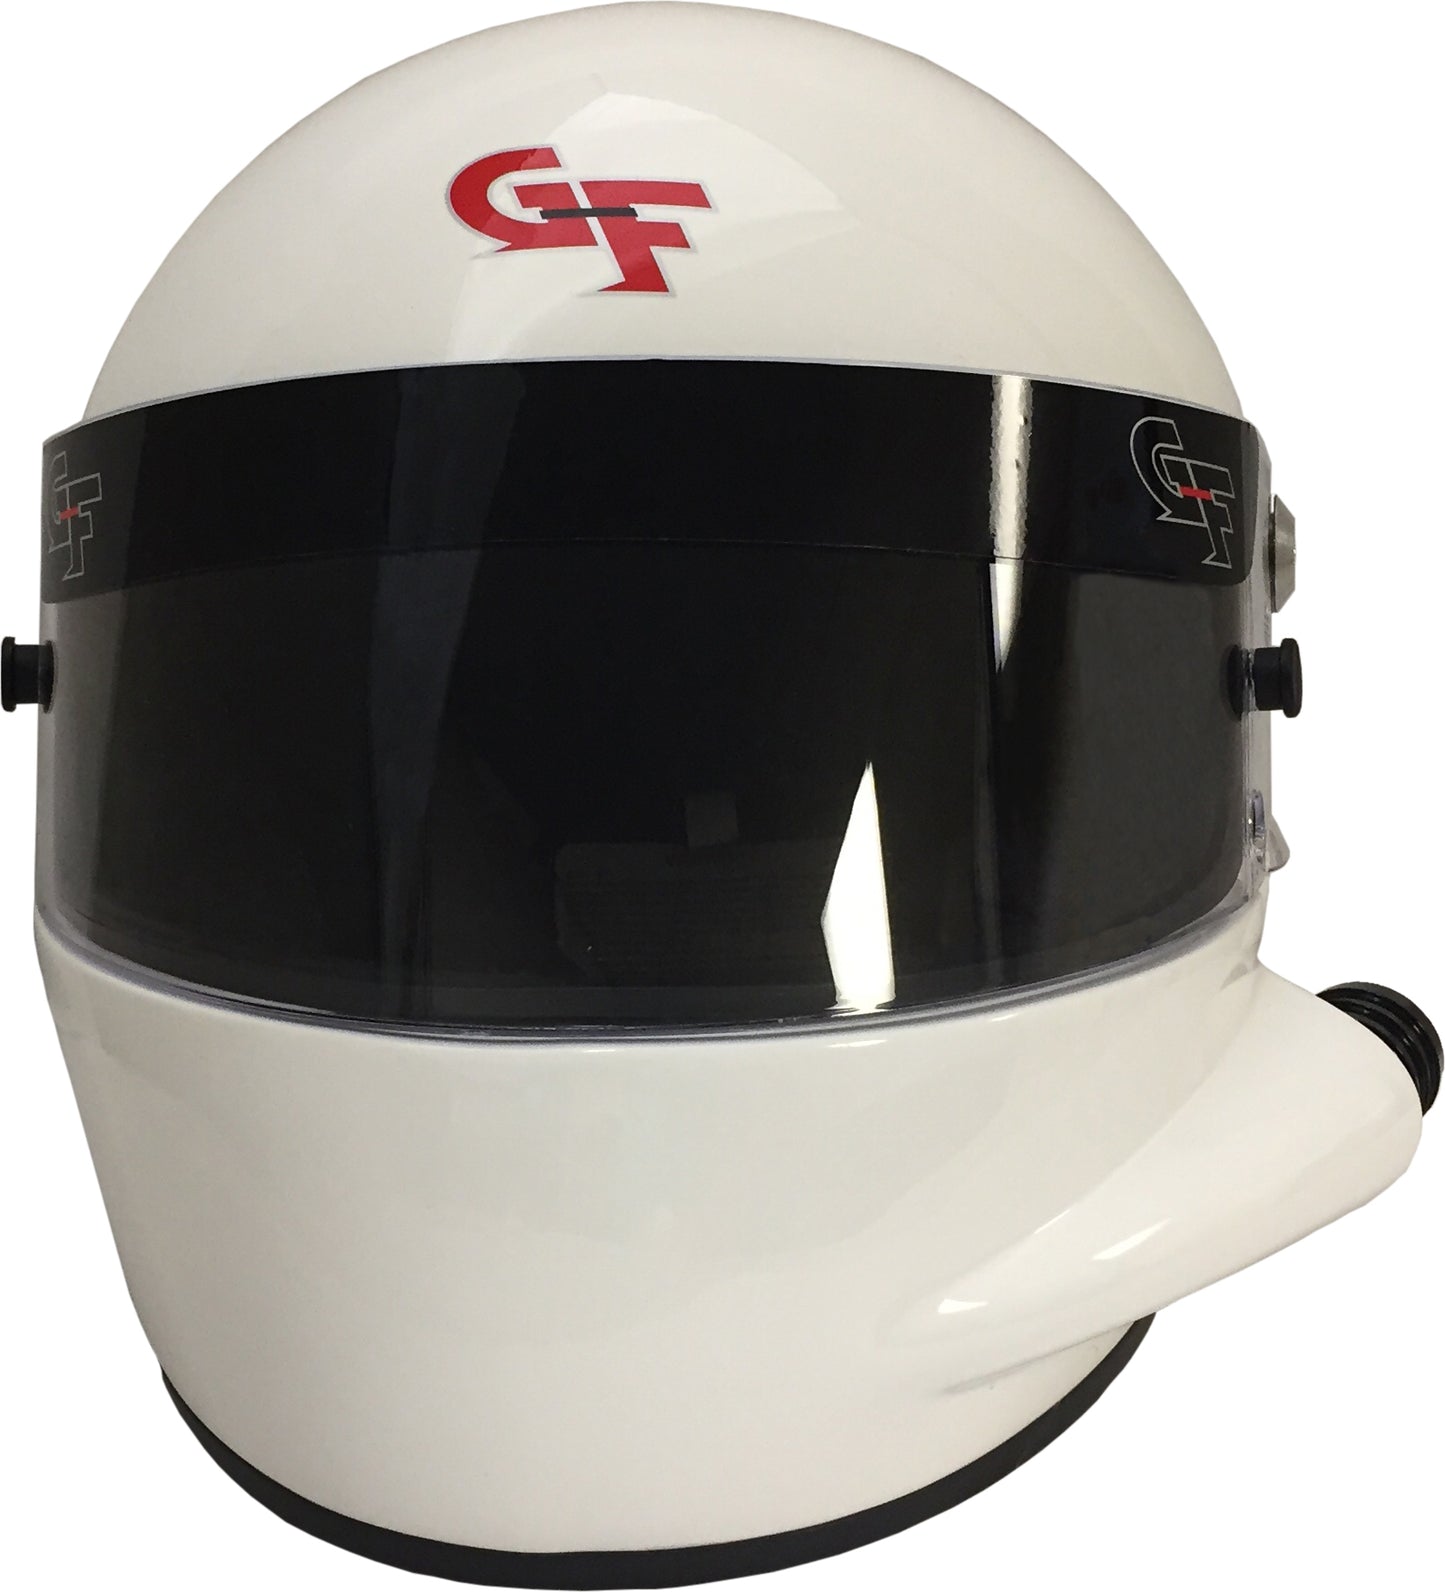 G-FORCE Racing Gear GF7 FULL FACE XLG WHITE SA15 3127XLGWH